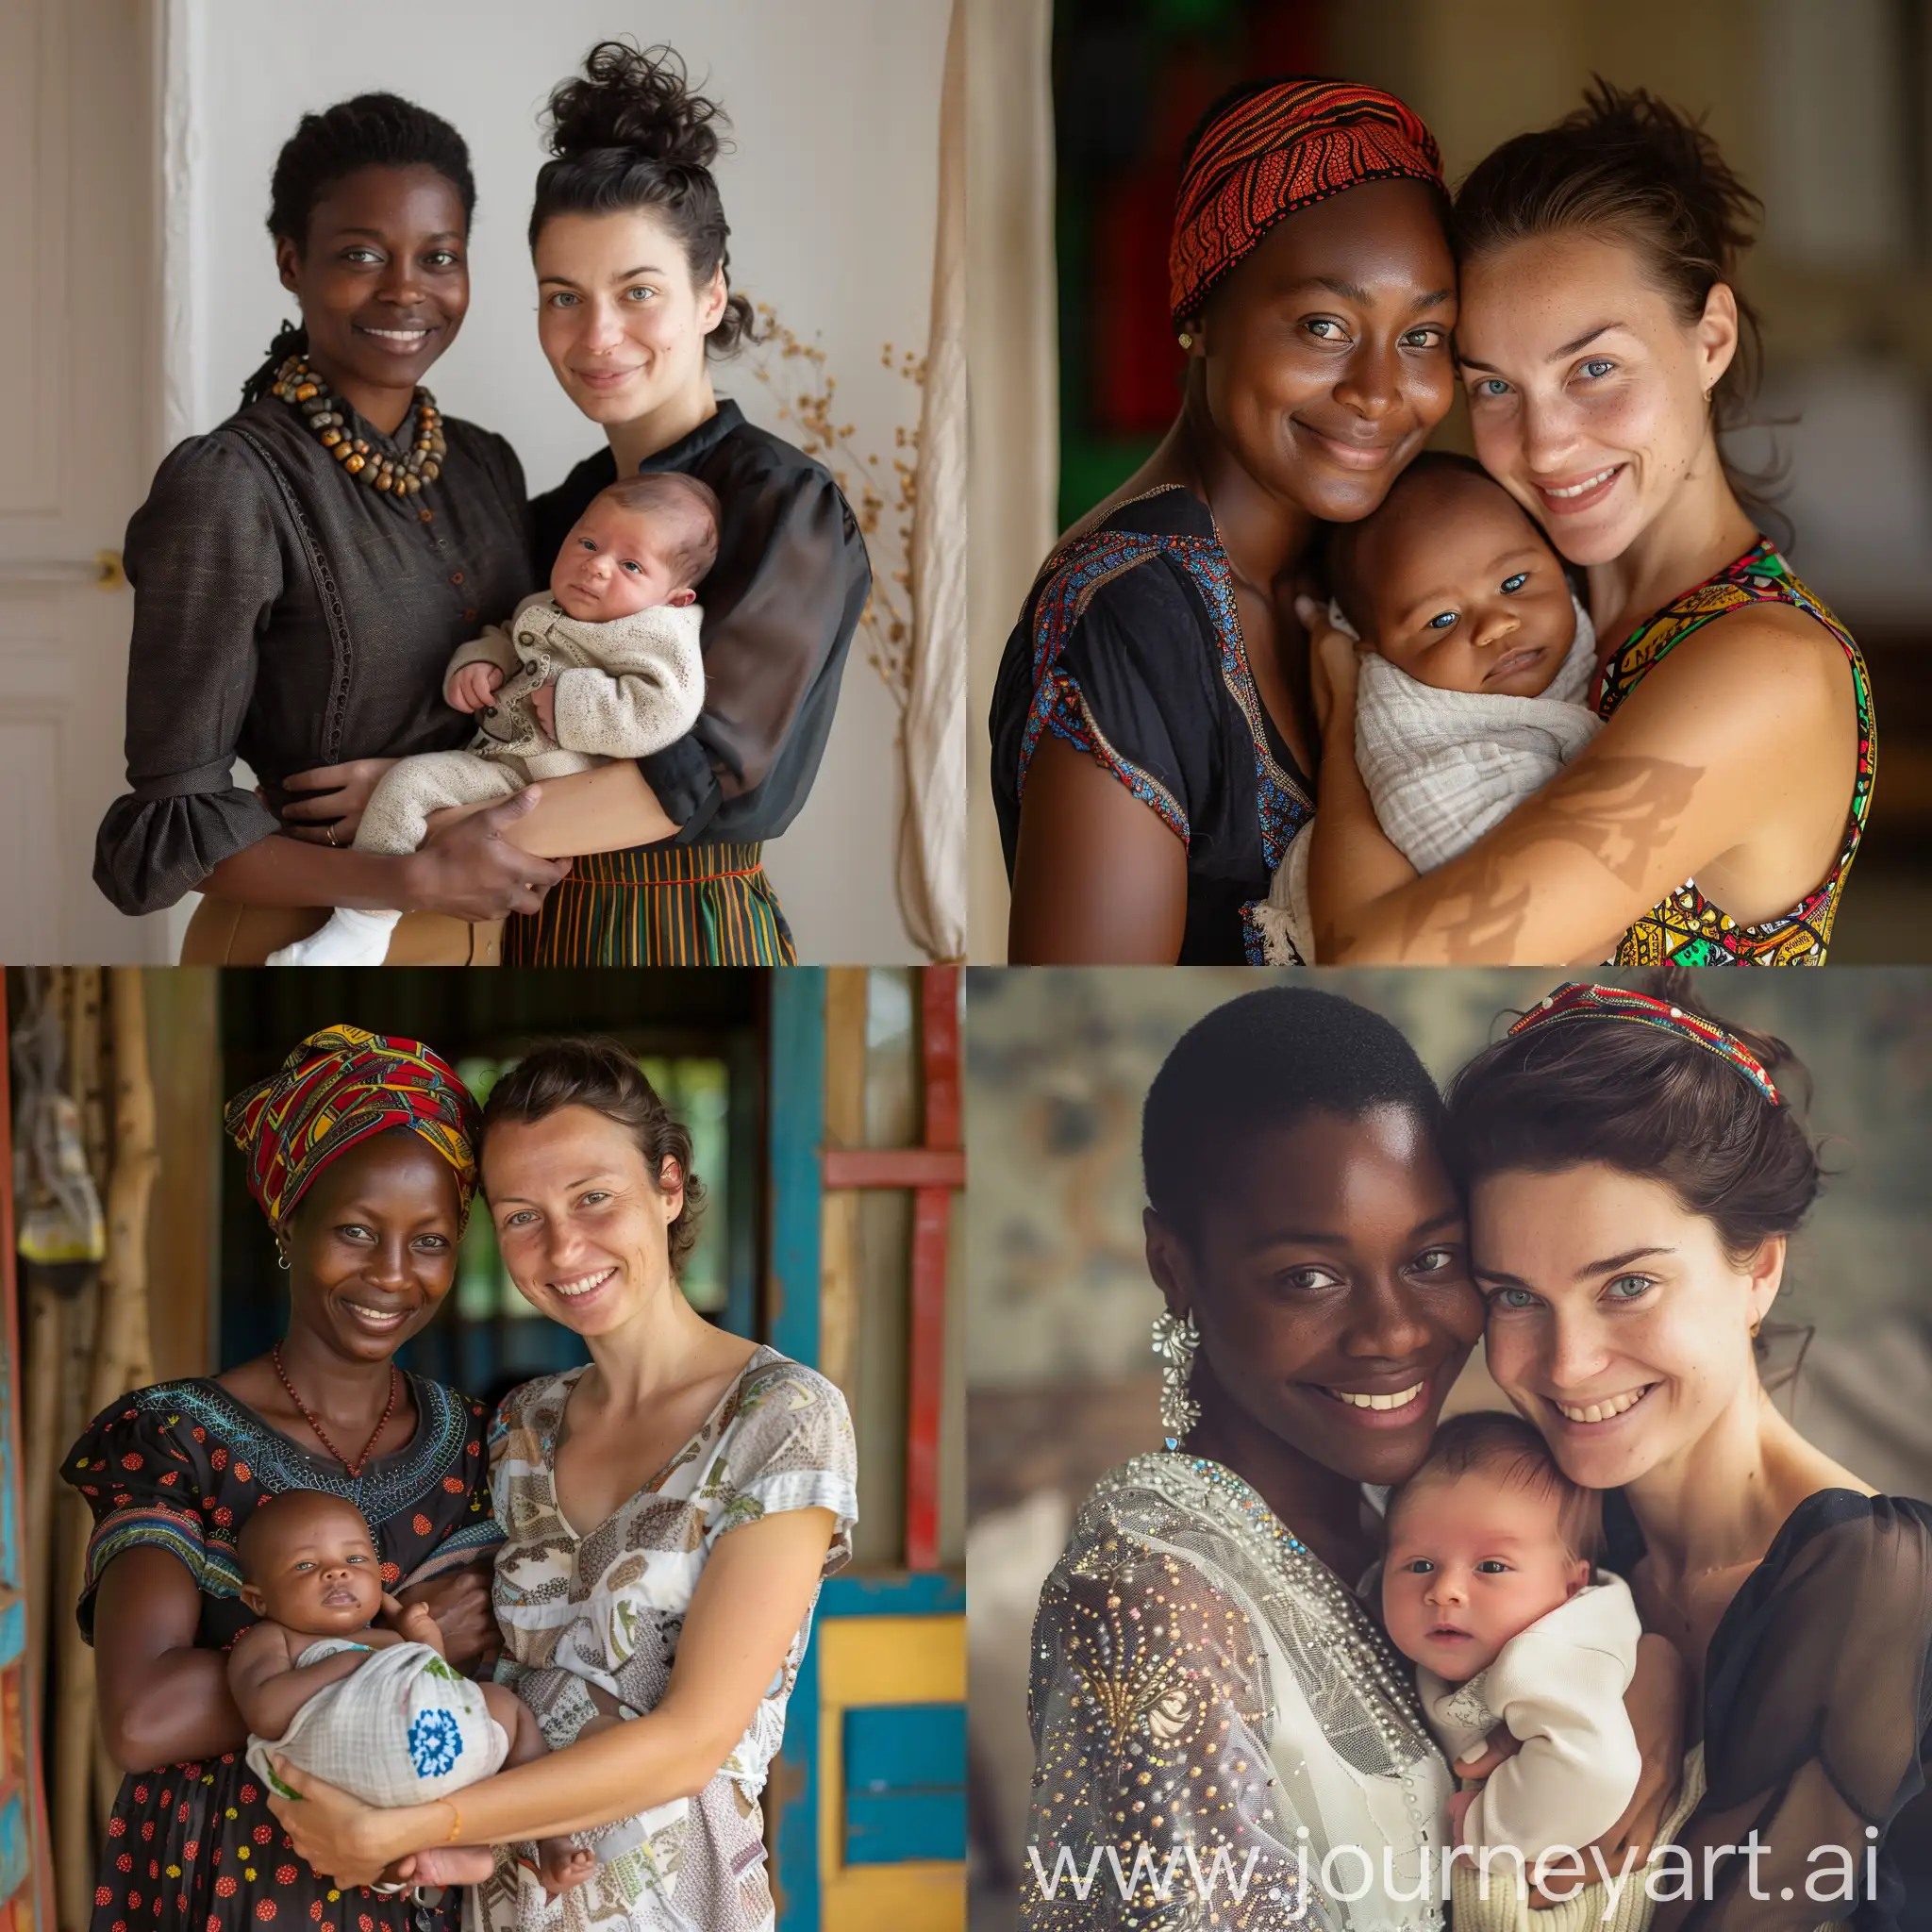 two women, one African, one European holding together a baby